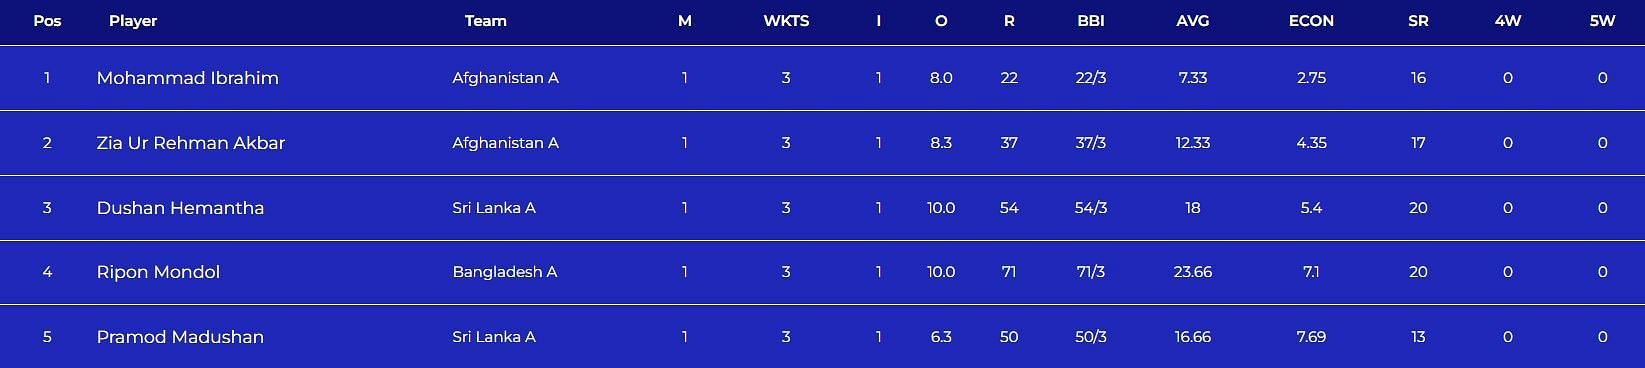 Most Wickets list after Match 2 (Image Courtesy: www.asiancricket.org)